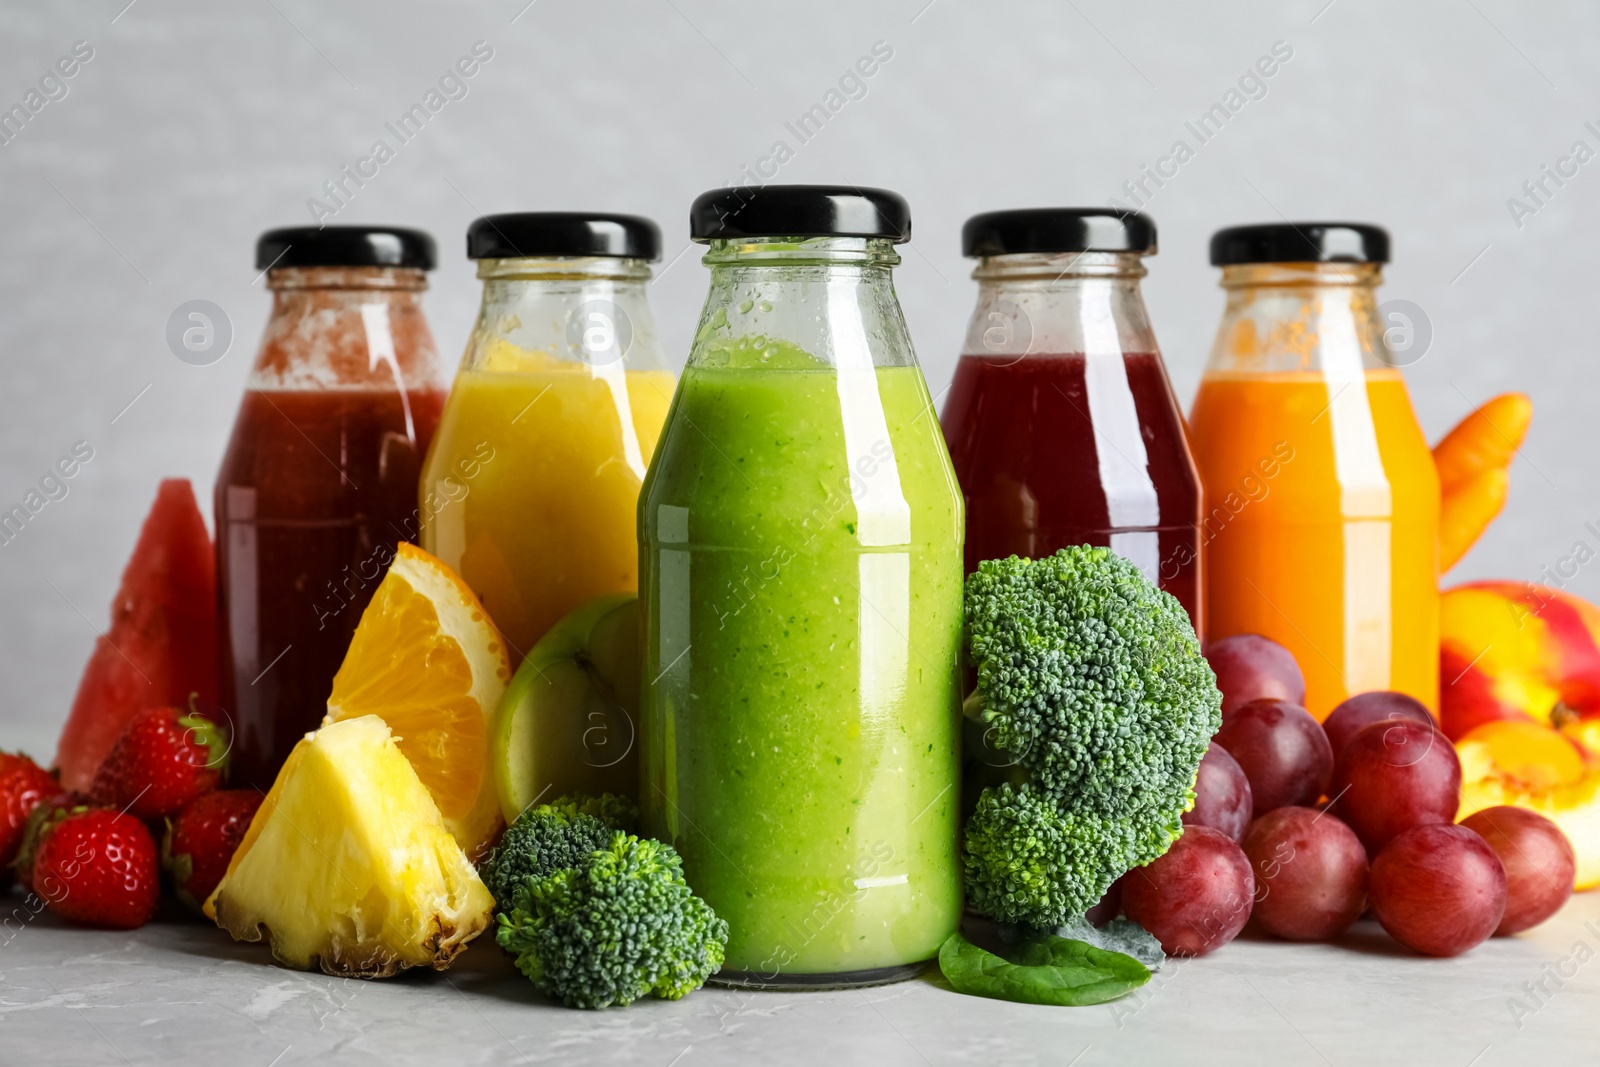 Photo of Bottles of delicious juices and fresh fruits on marble table